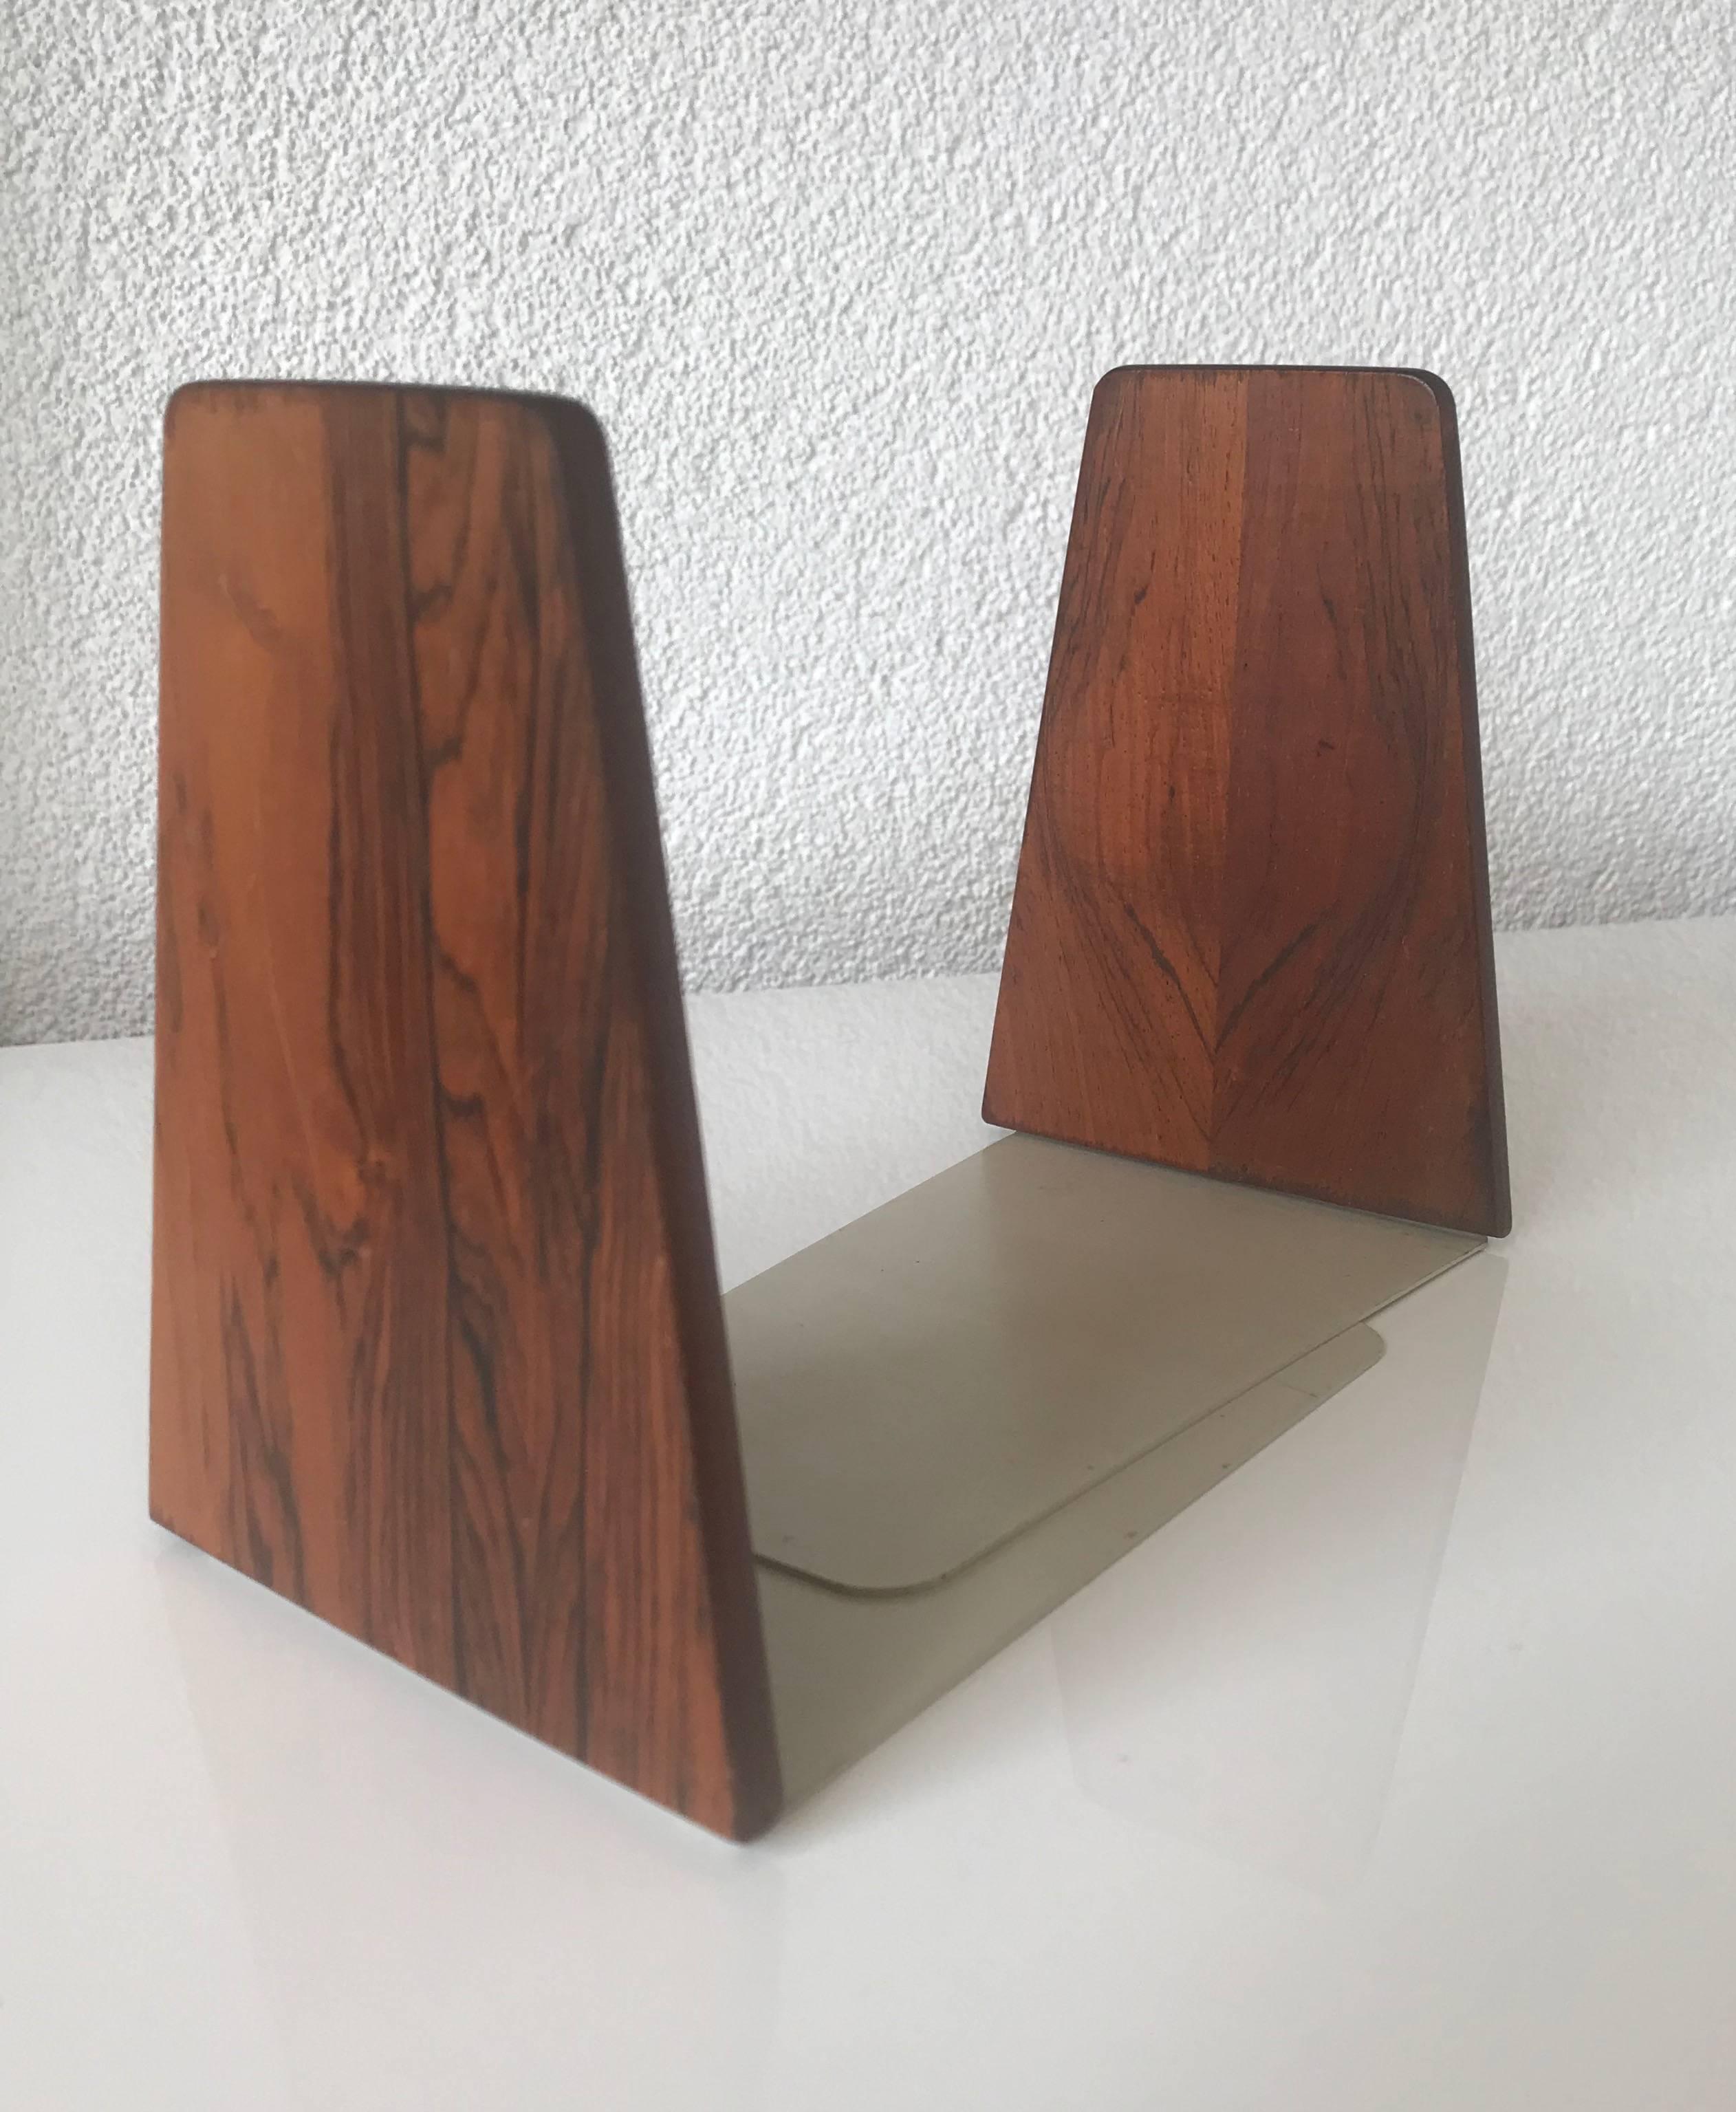 Practical and stylish midcentury bookends.

If you are a collector of mid-century furniture and home accessories then these beautiful shape and condition bookends could be the perfect addition to your interior. The combination of the fine wood and